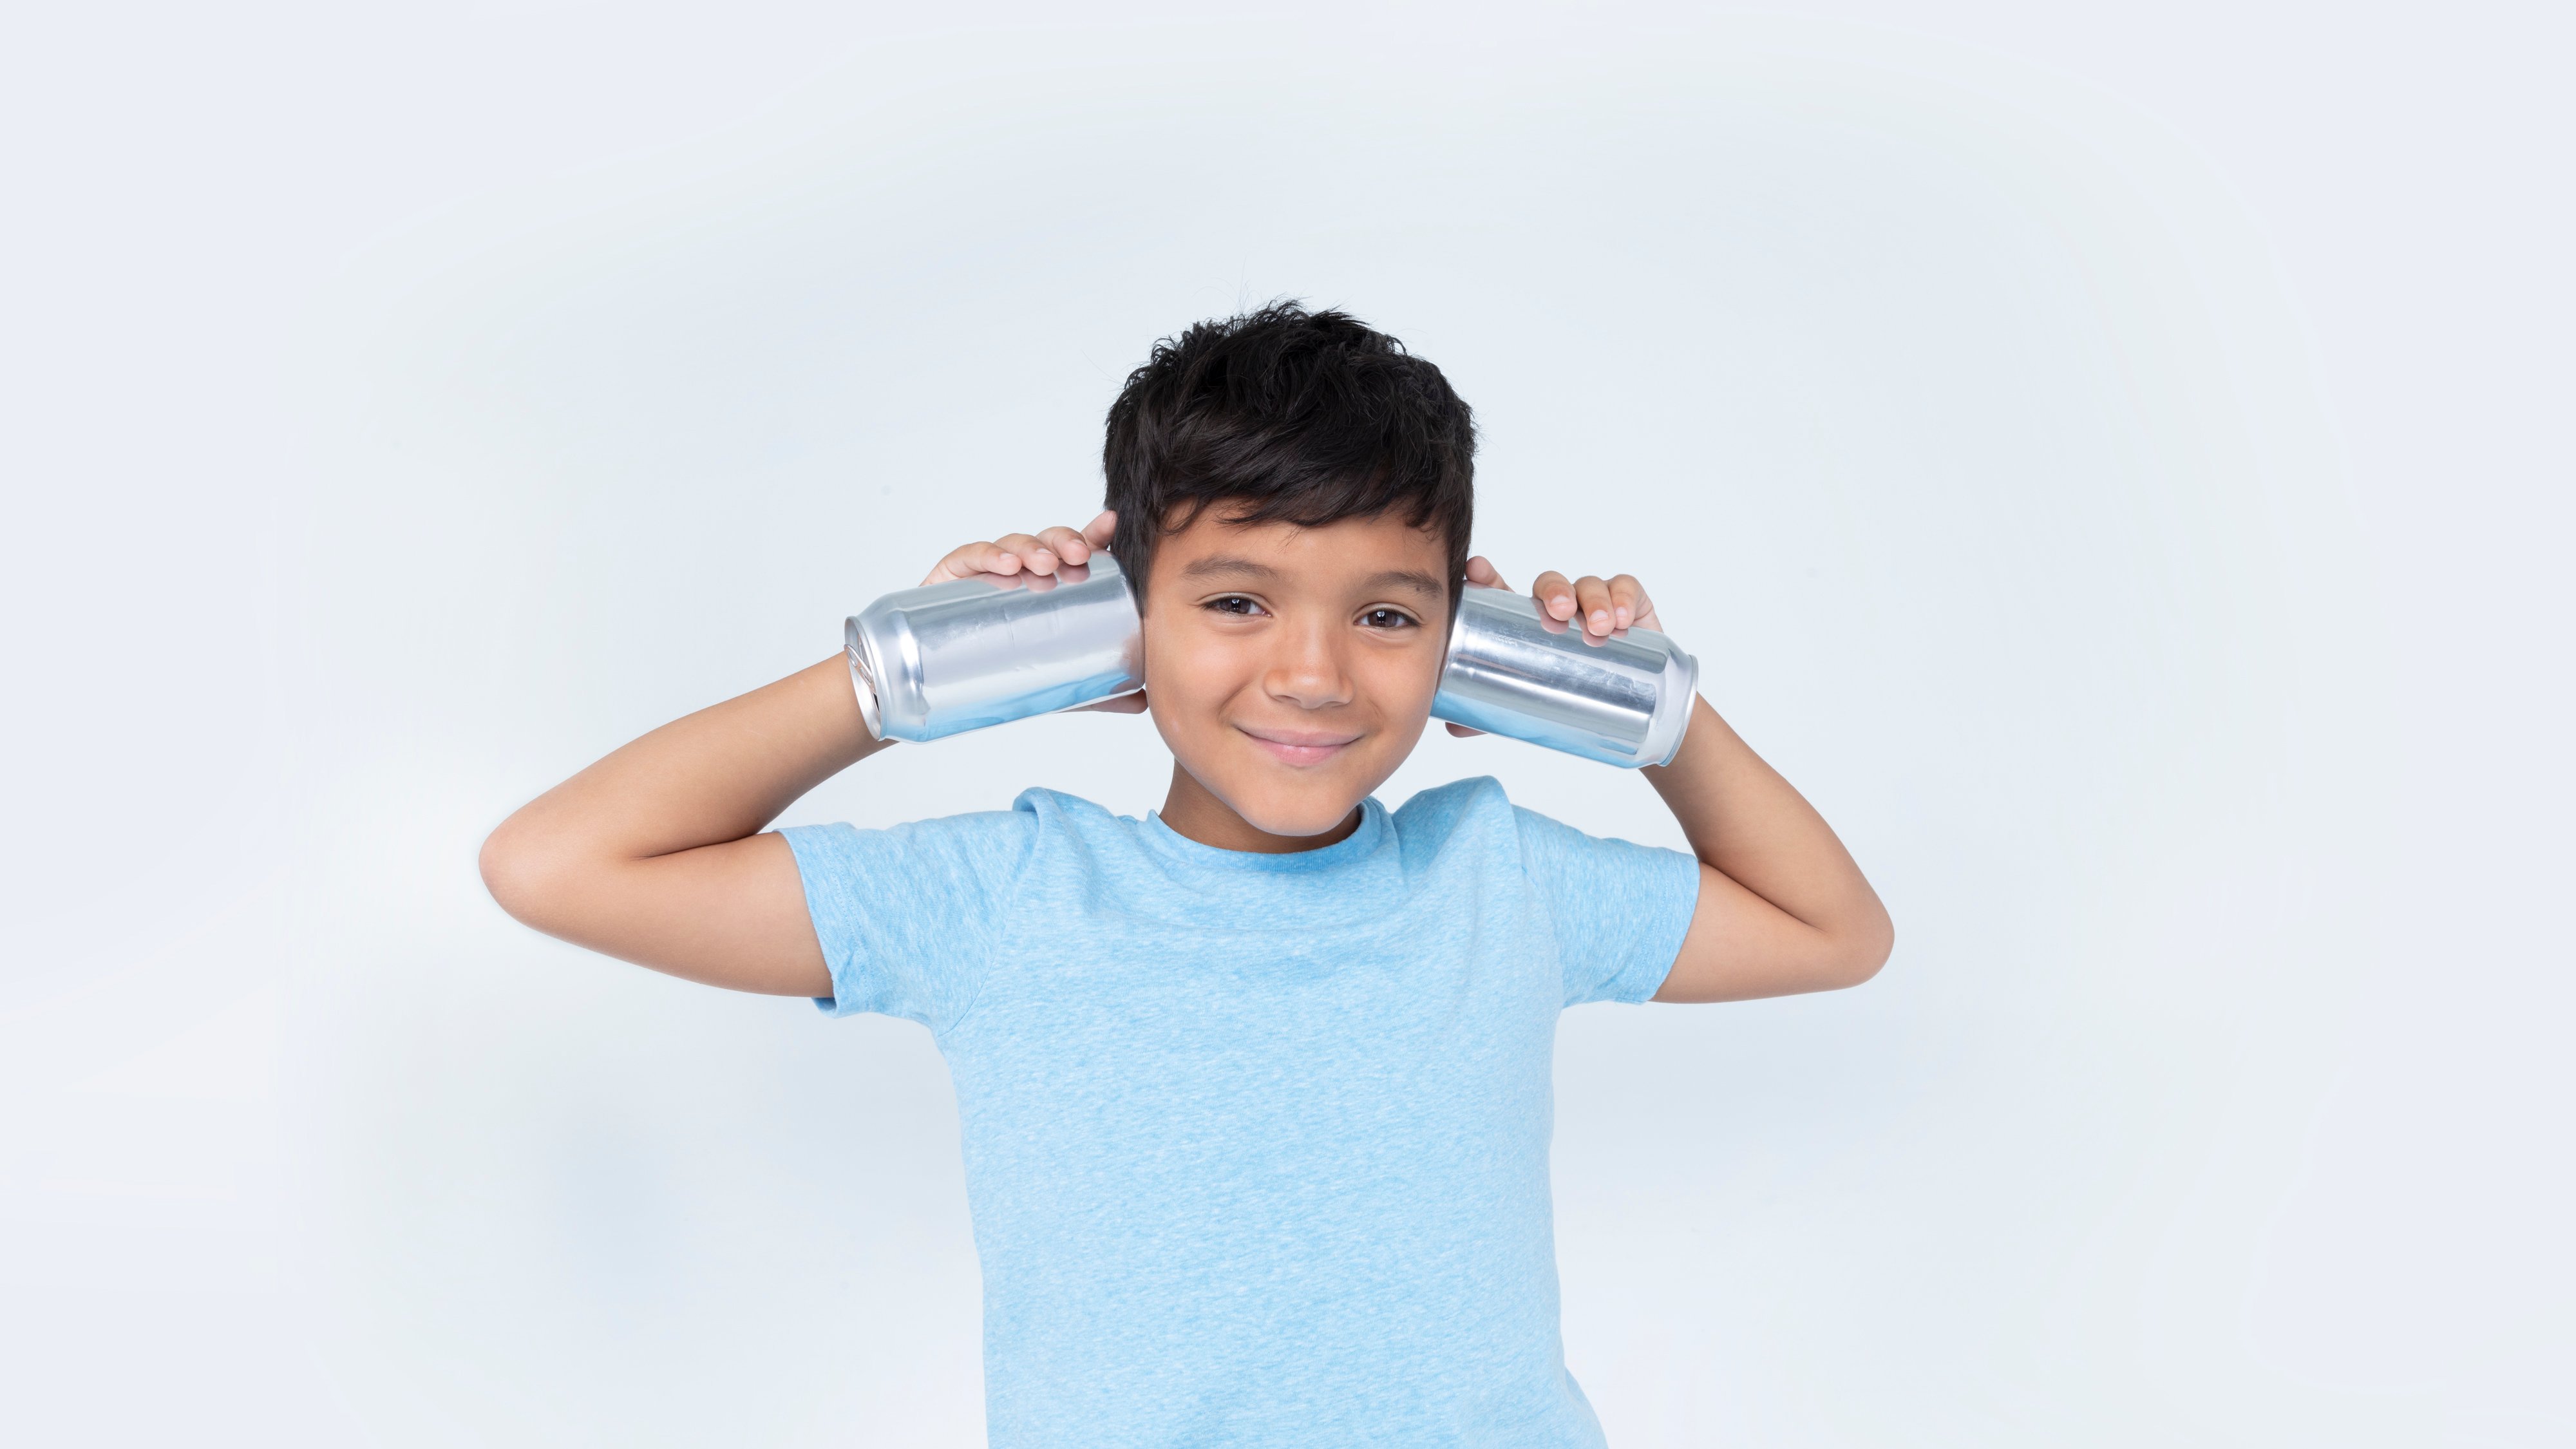 Boy holding cans up to his ears